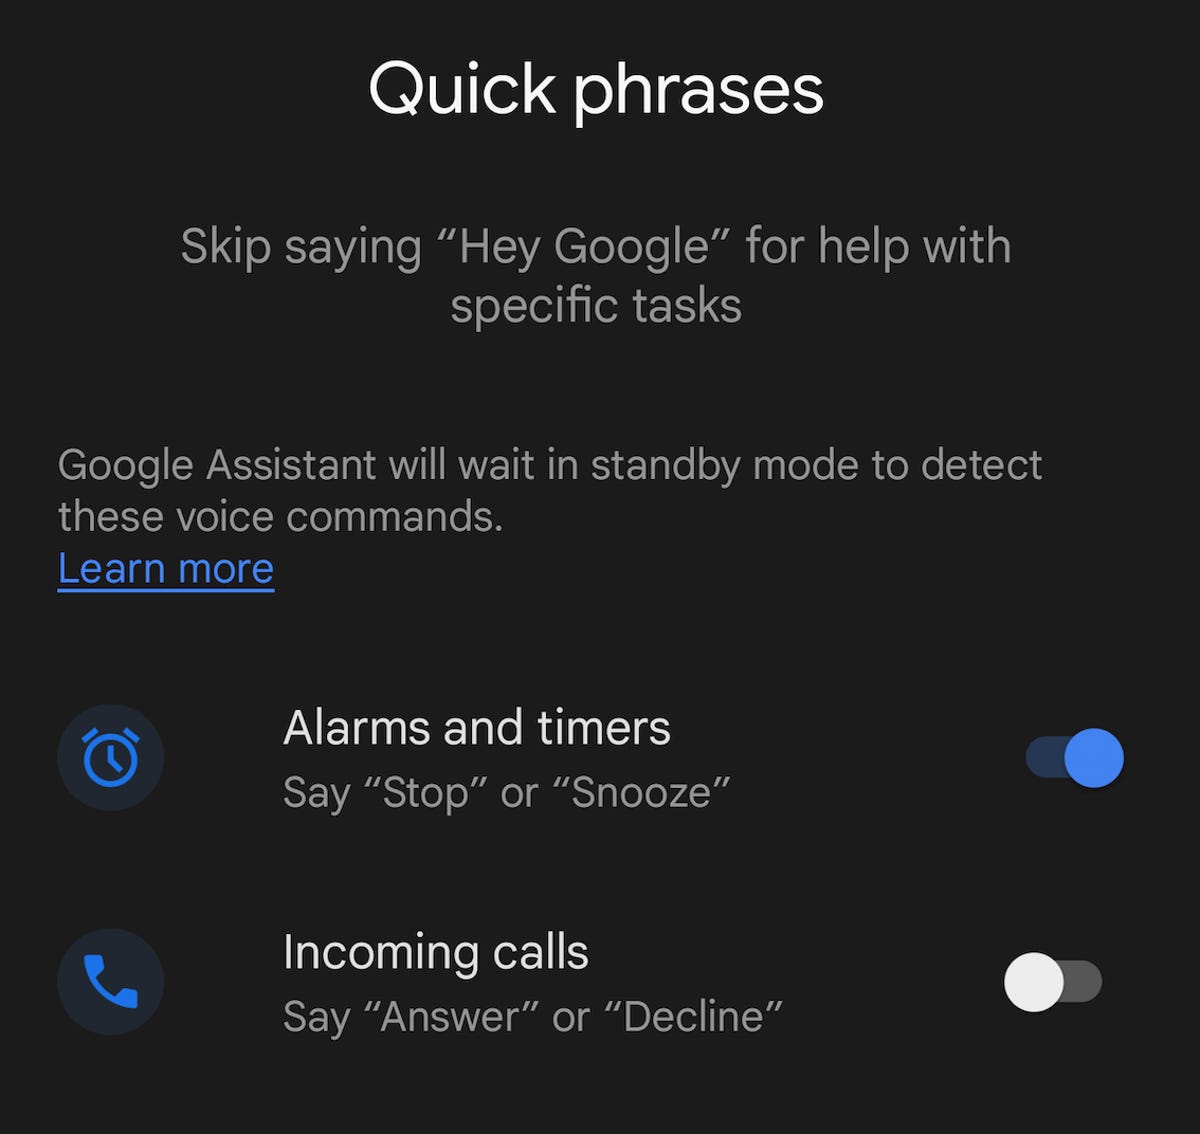 A screenshot showing Google's Quick Phrases setting